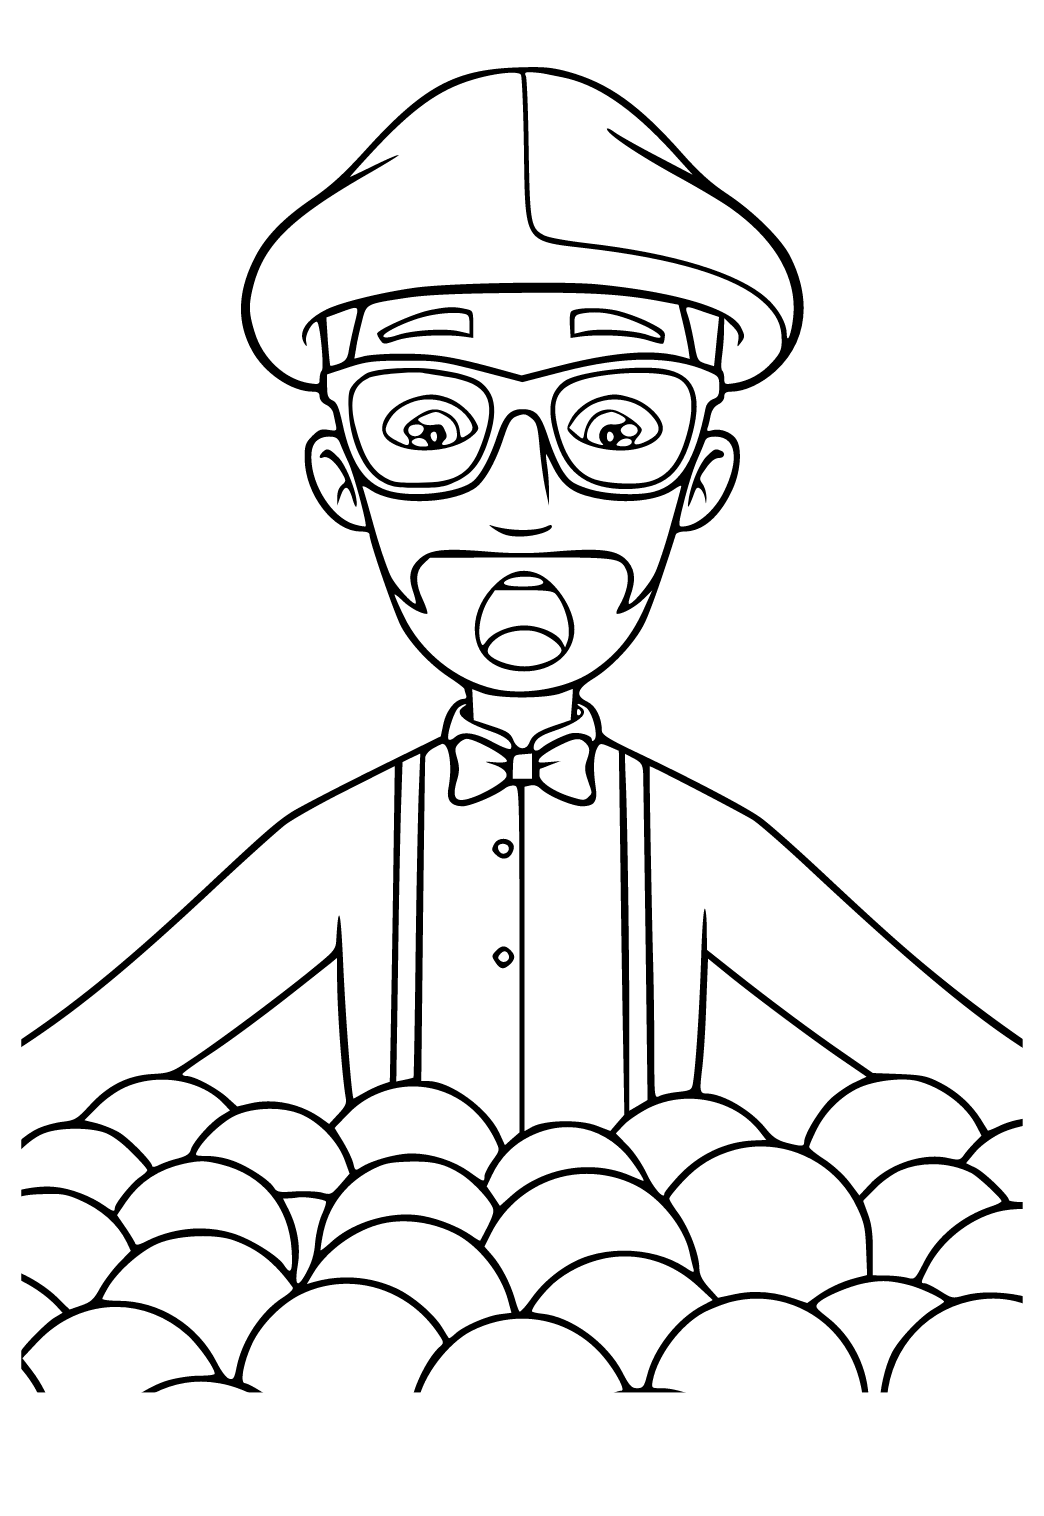 nerd coloring pages